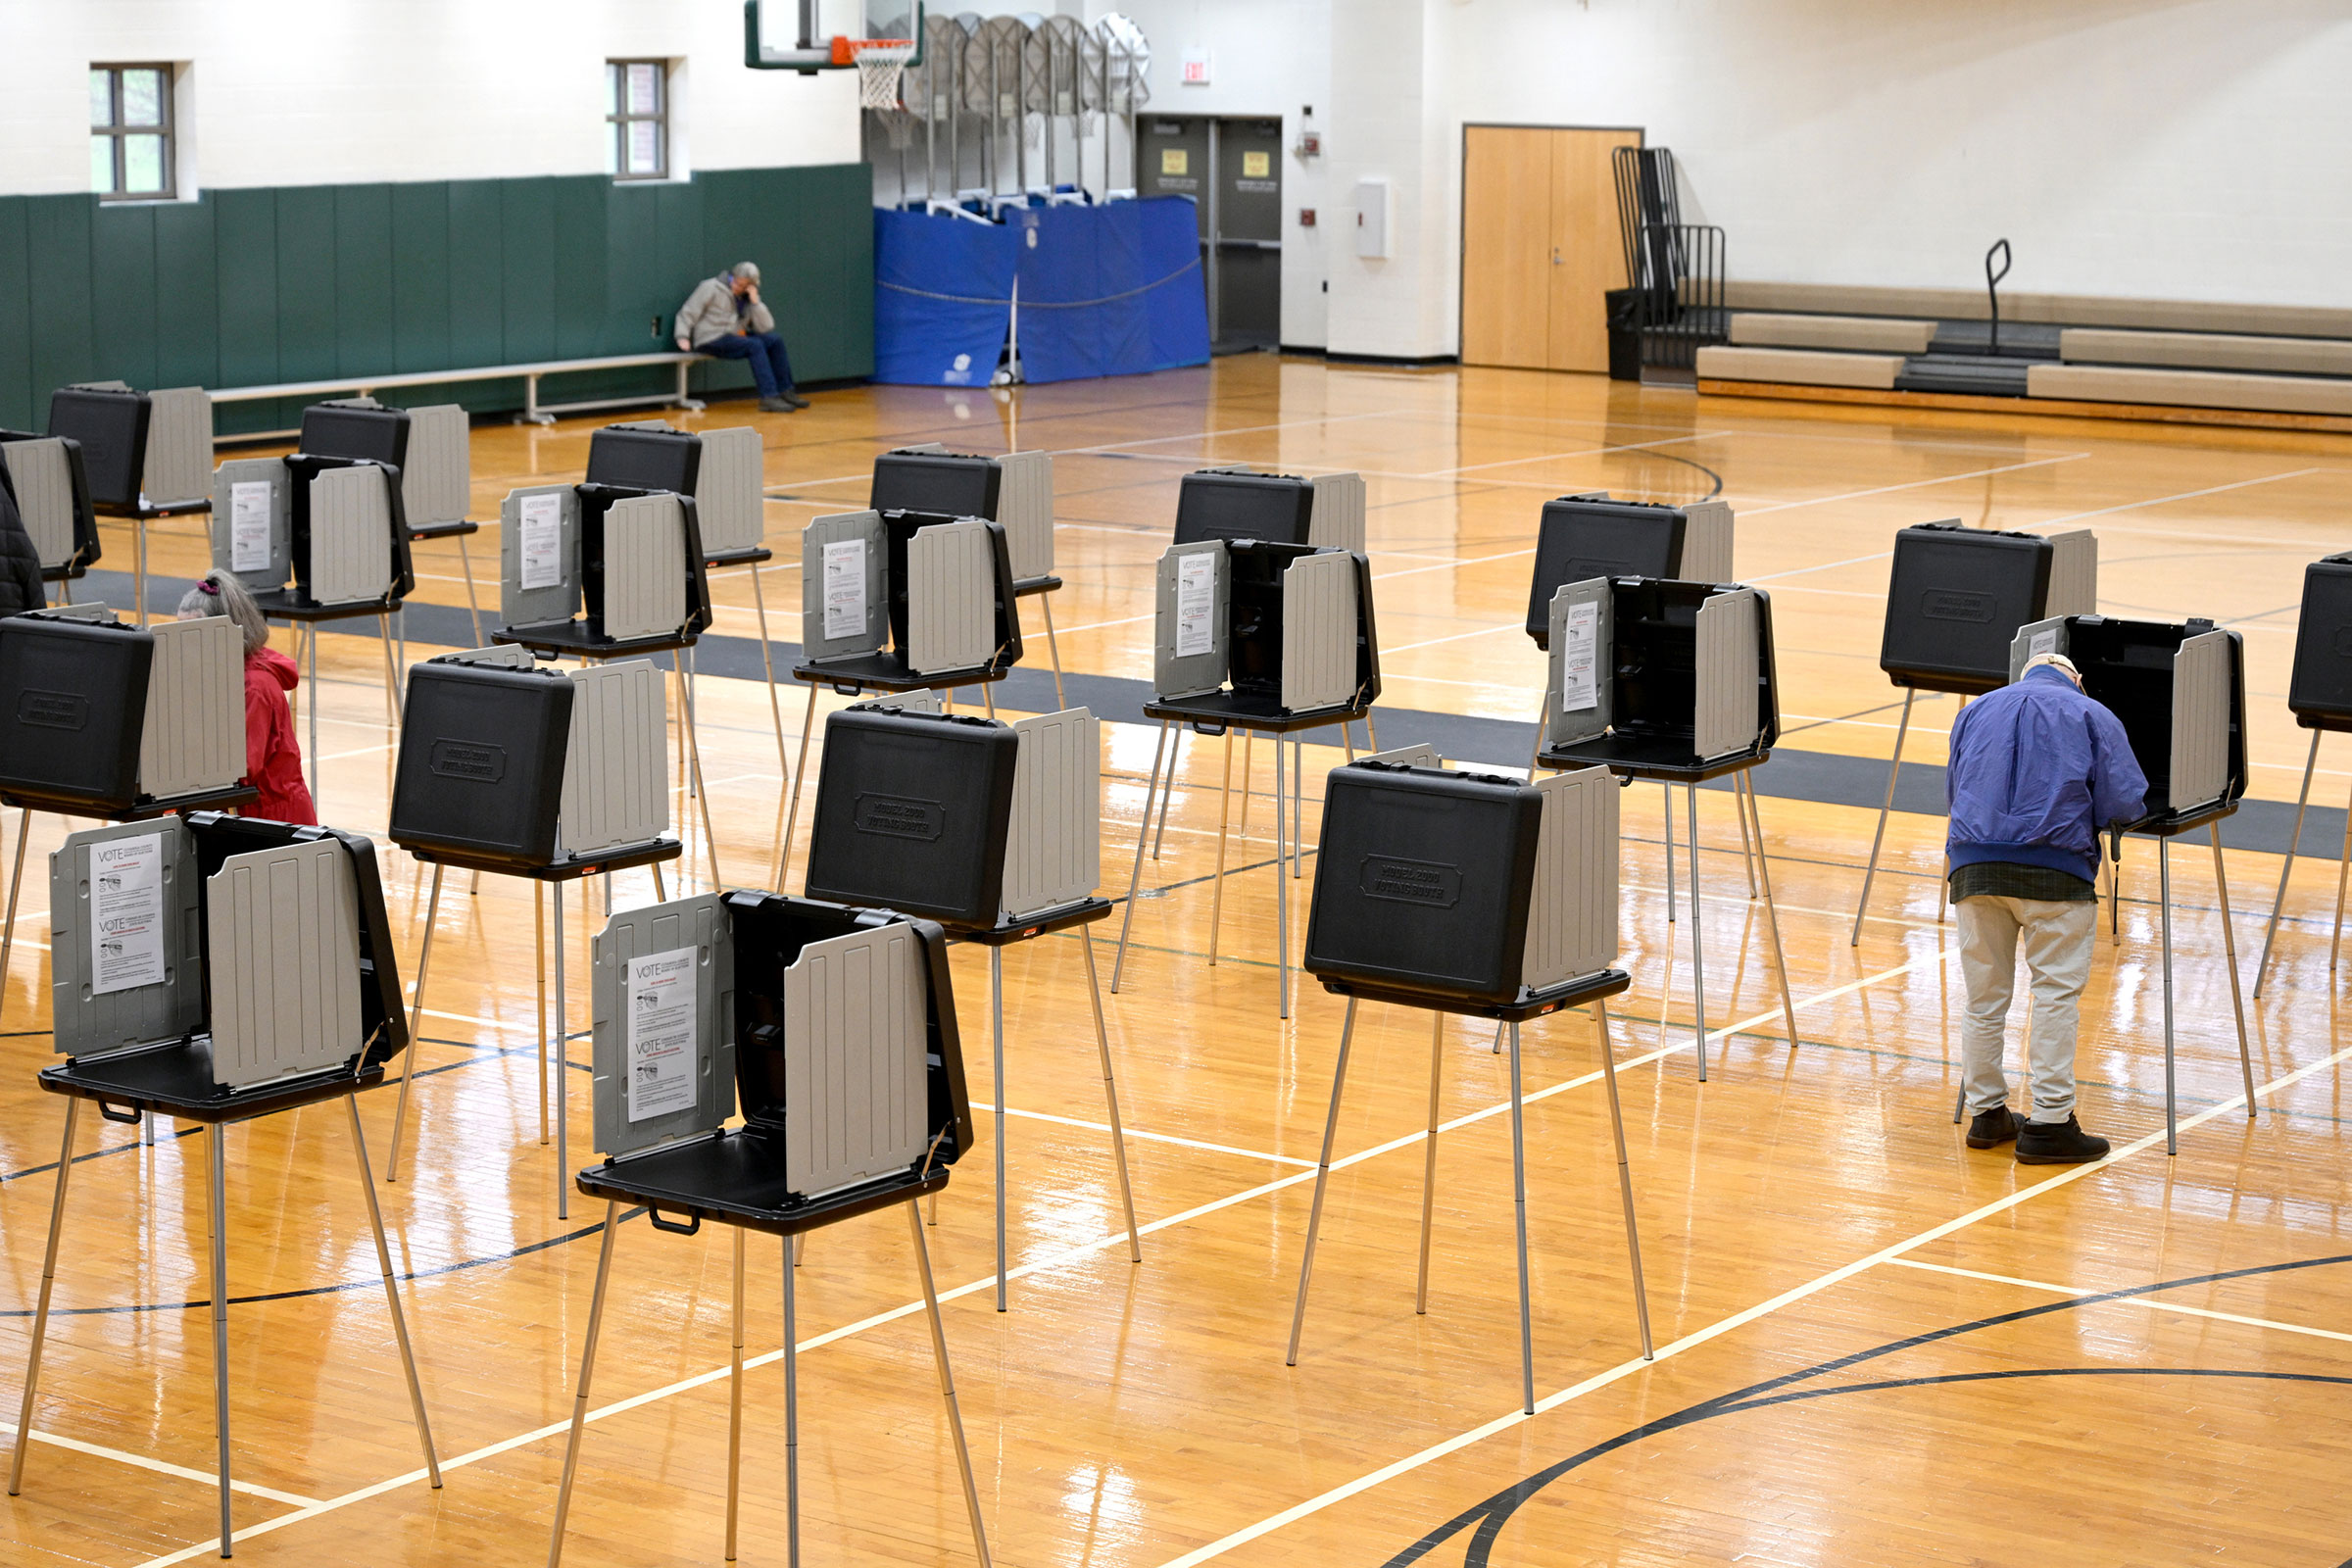 Voters fill out their ballots at a polling station in Cleveland Heights, Ohio, on Tuesday, March 19.